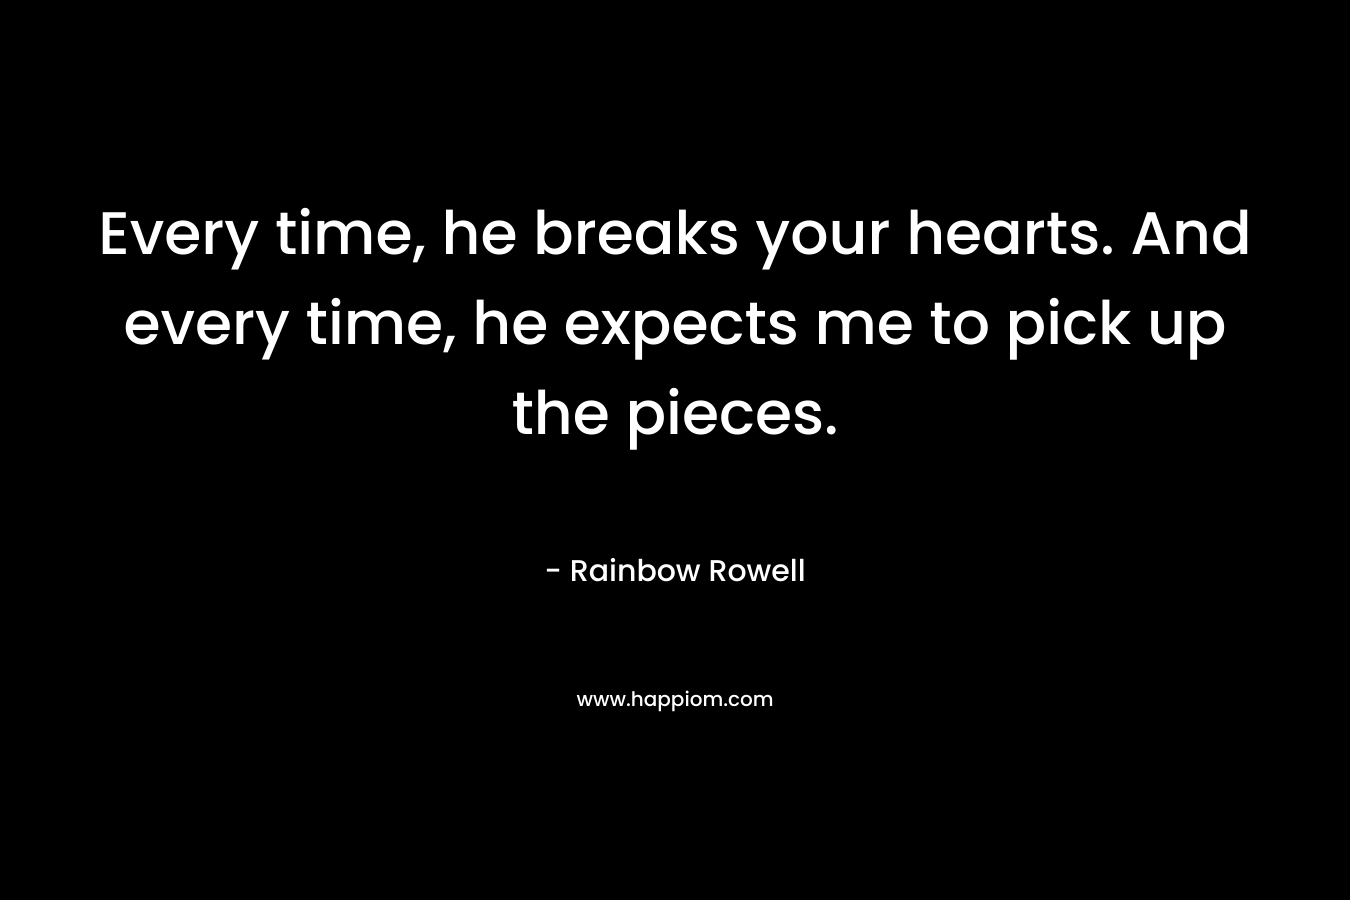 Every time, he breaks your hearts. And every time, he expects me to pick up the pieces. – Rainbow Rowell